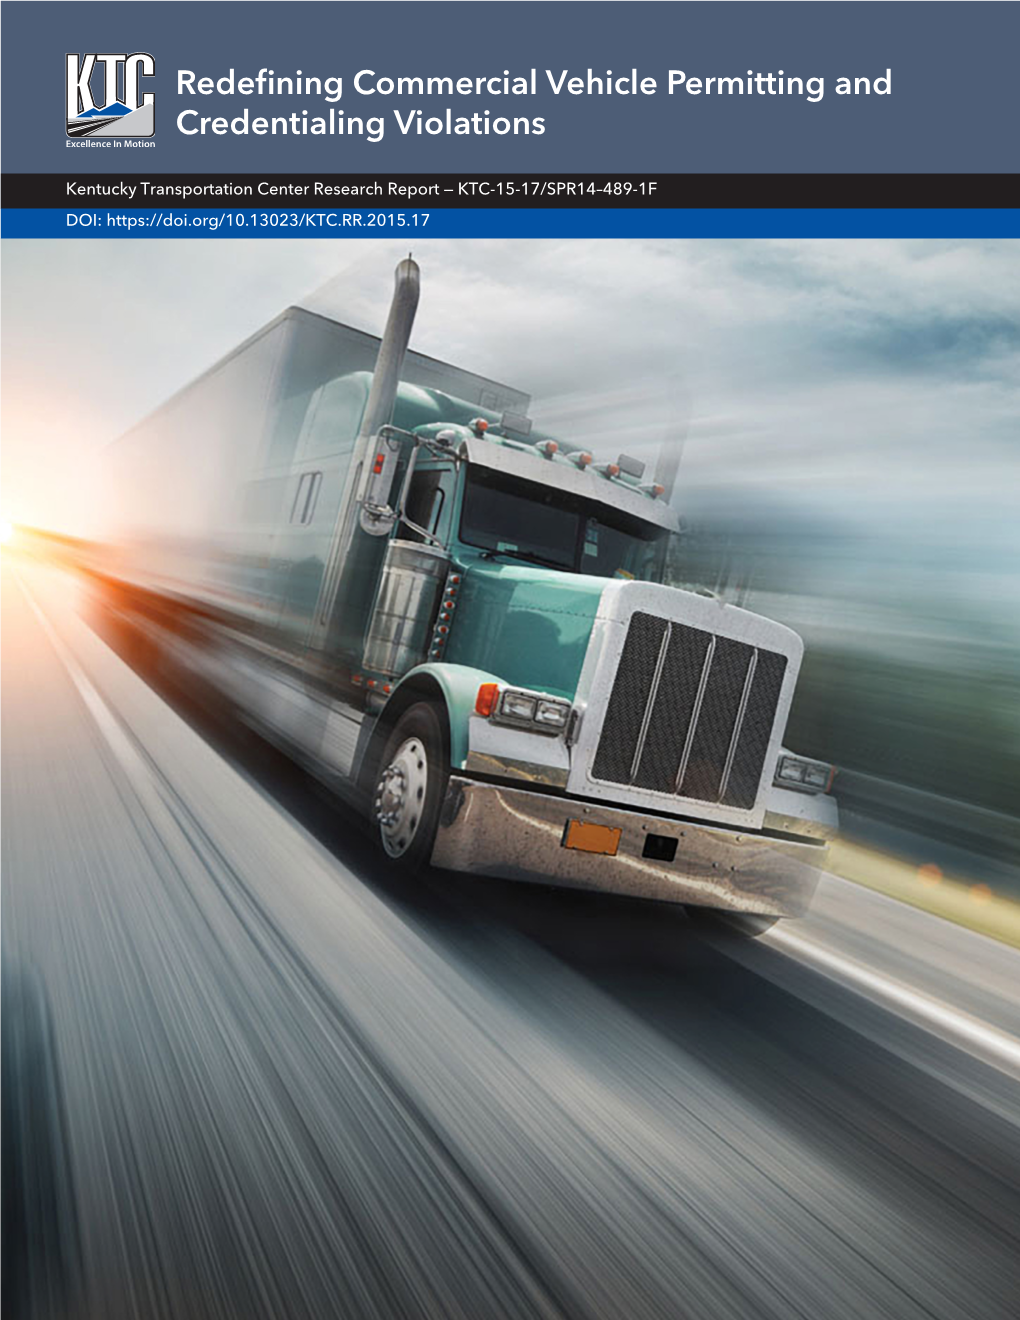 Redefining Commercial Vehicle Permitting and Credentialing Violations